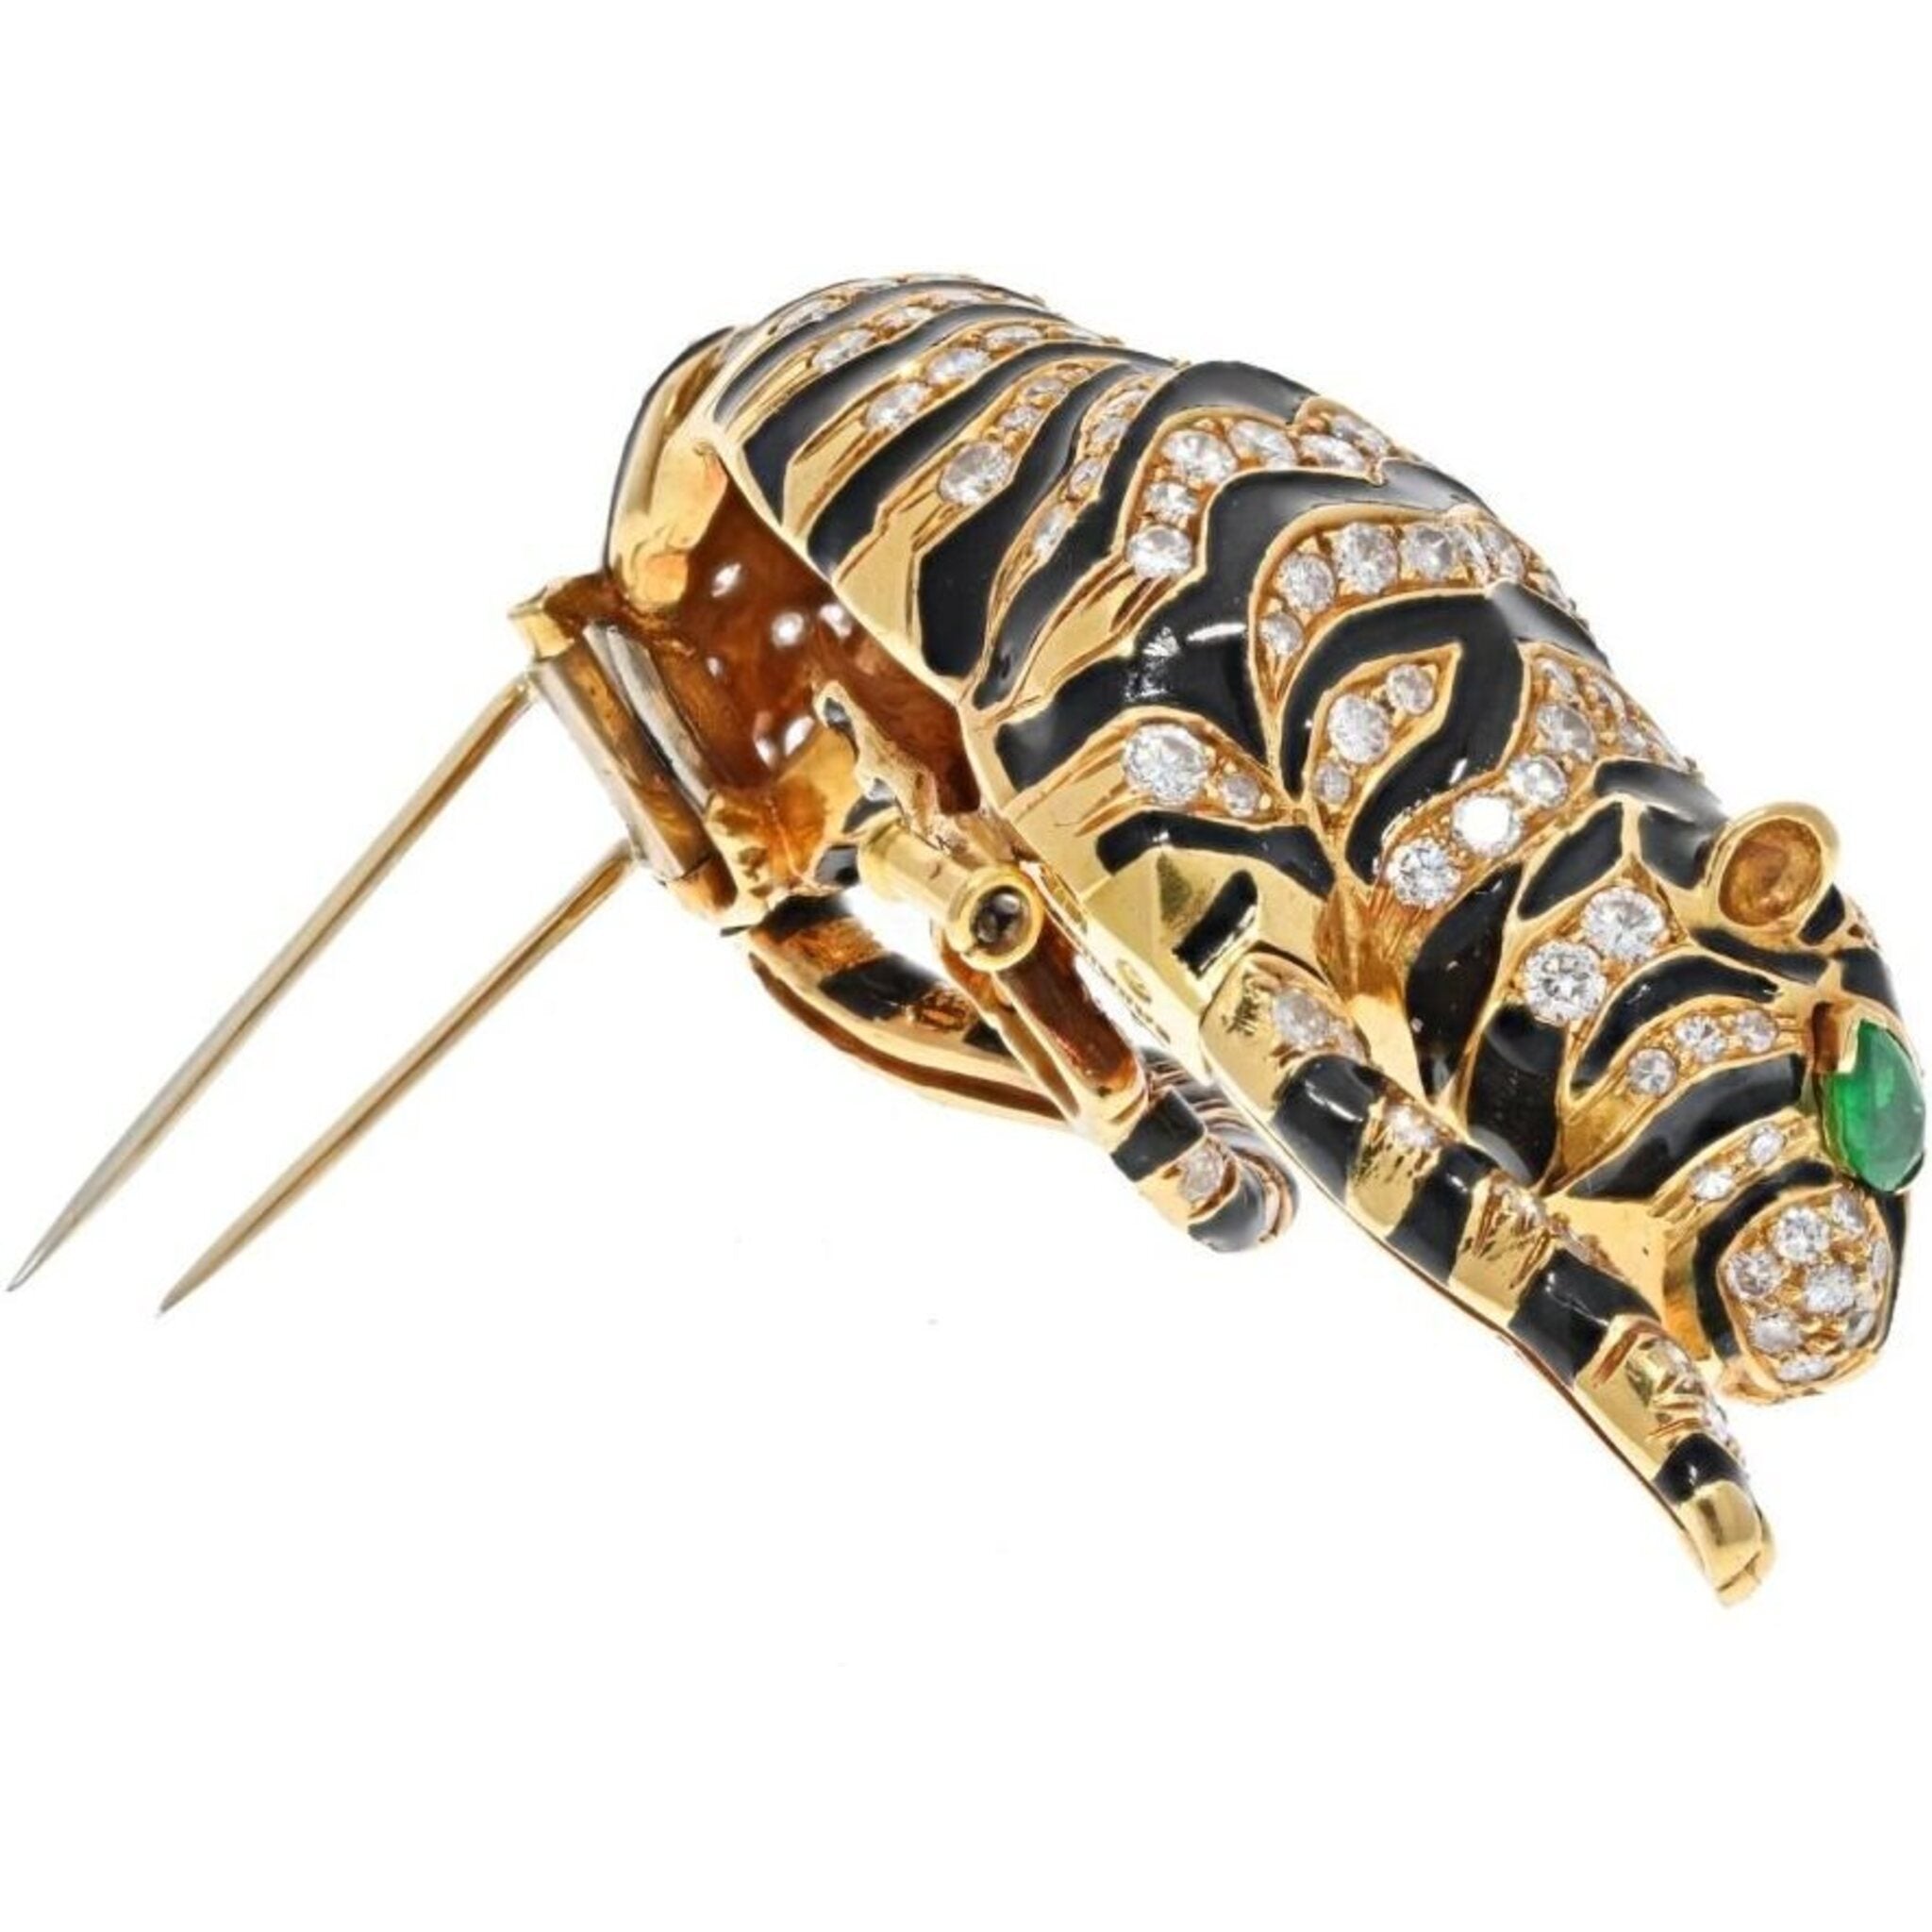 18k Yellow Gold Tiger Claw Brooch.